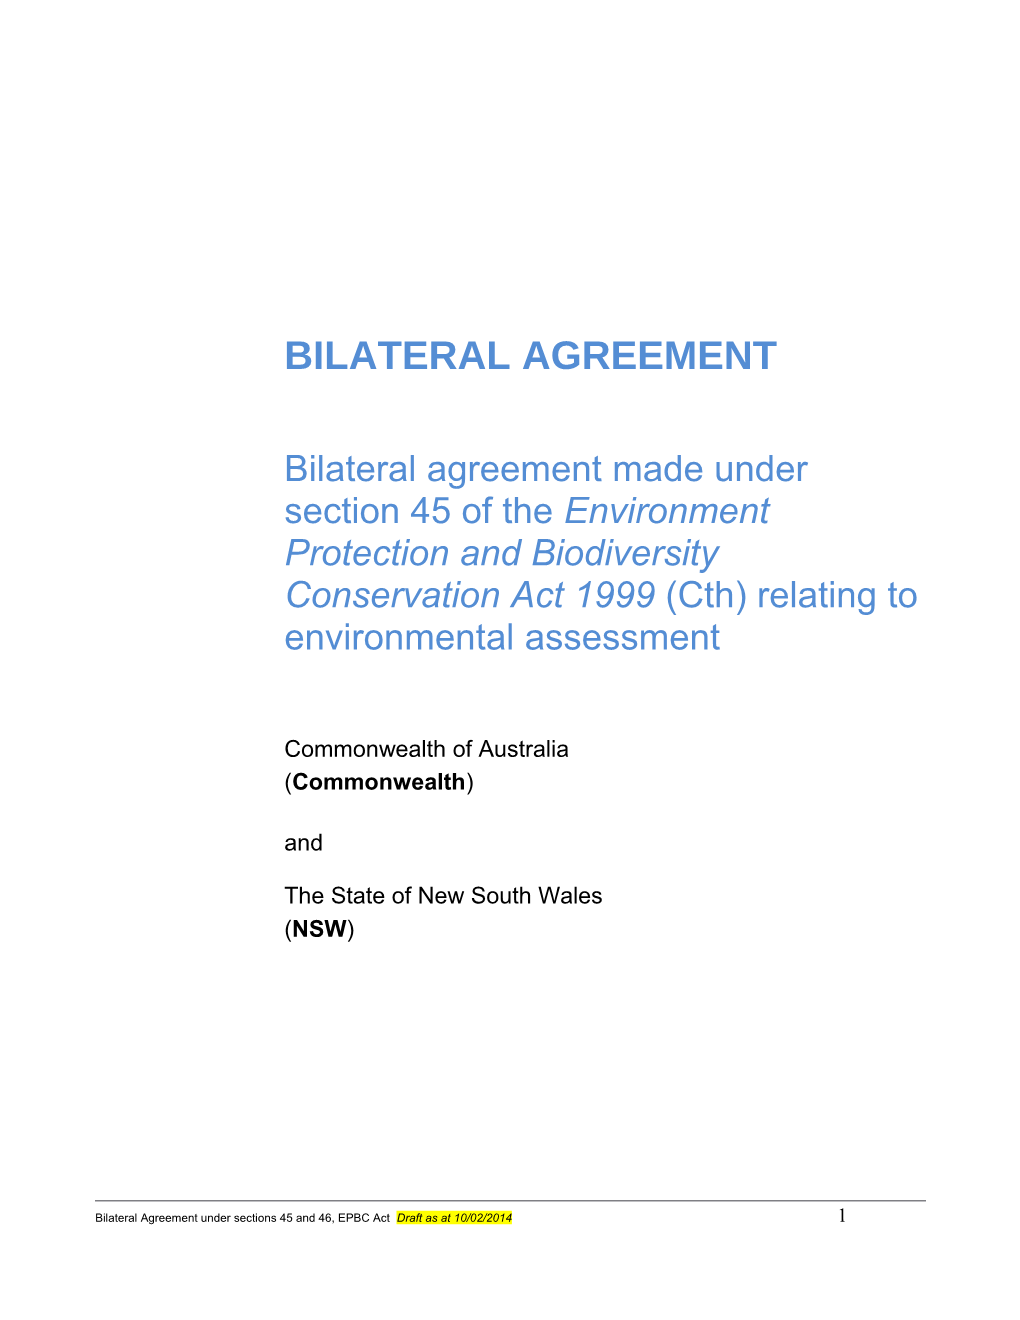 Bilateral Agreement Made Under Section 45 of the Environment Protection and Biodiversity